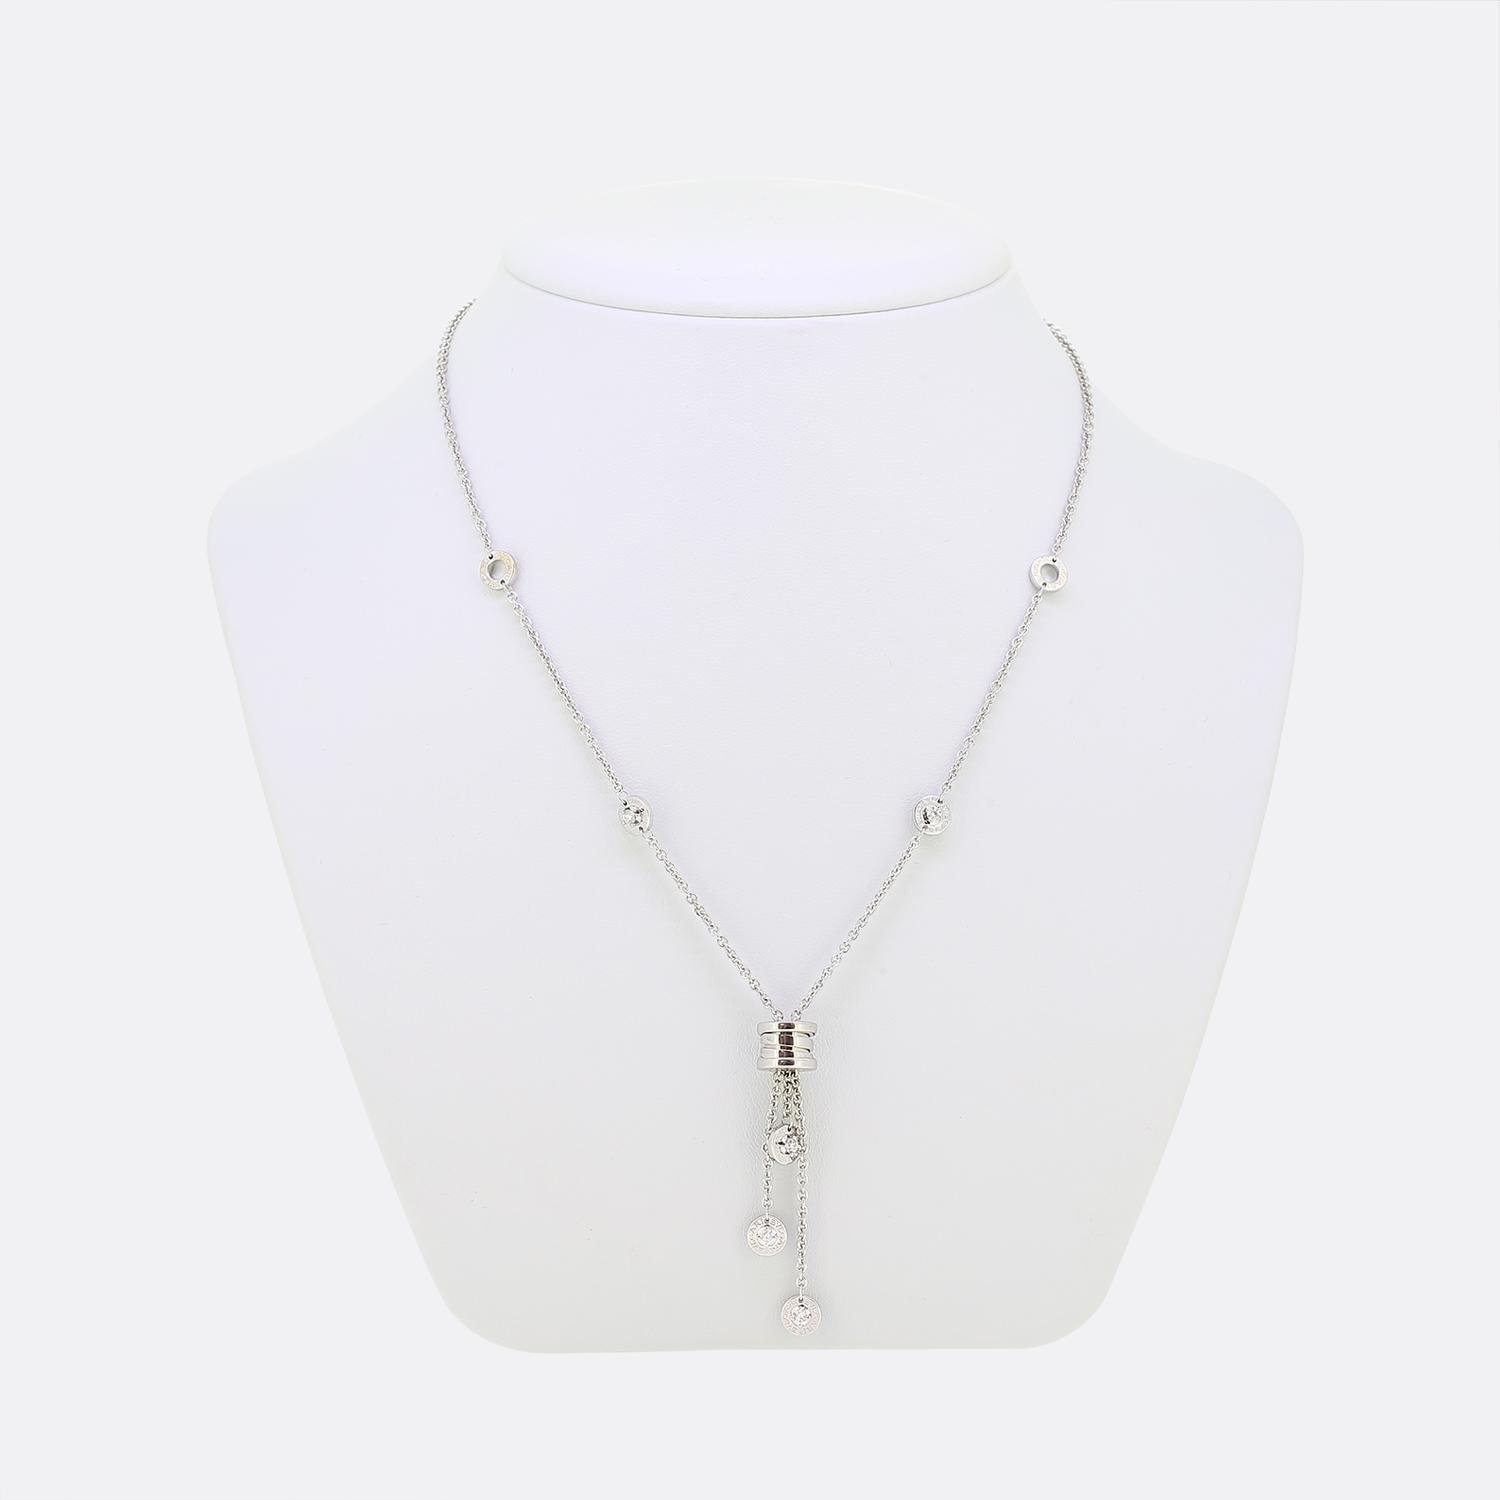 Here we have a luxurious 18ct white gold diamond necklace from Bvlgari. This piece is comprised of the iconic B.zero1 motif with three tassels hanging freely. Each tassel has a circular motif at the end with a round brilliant cut diamond set to the